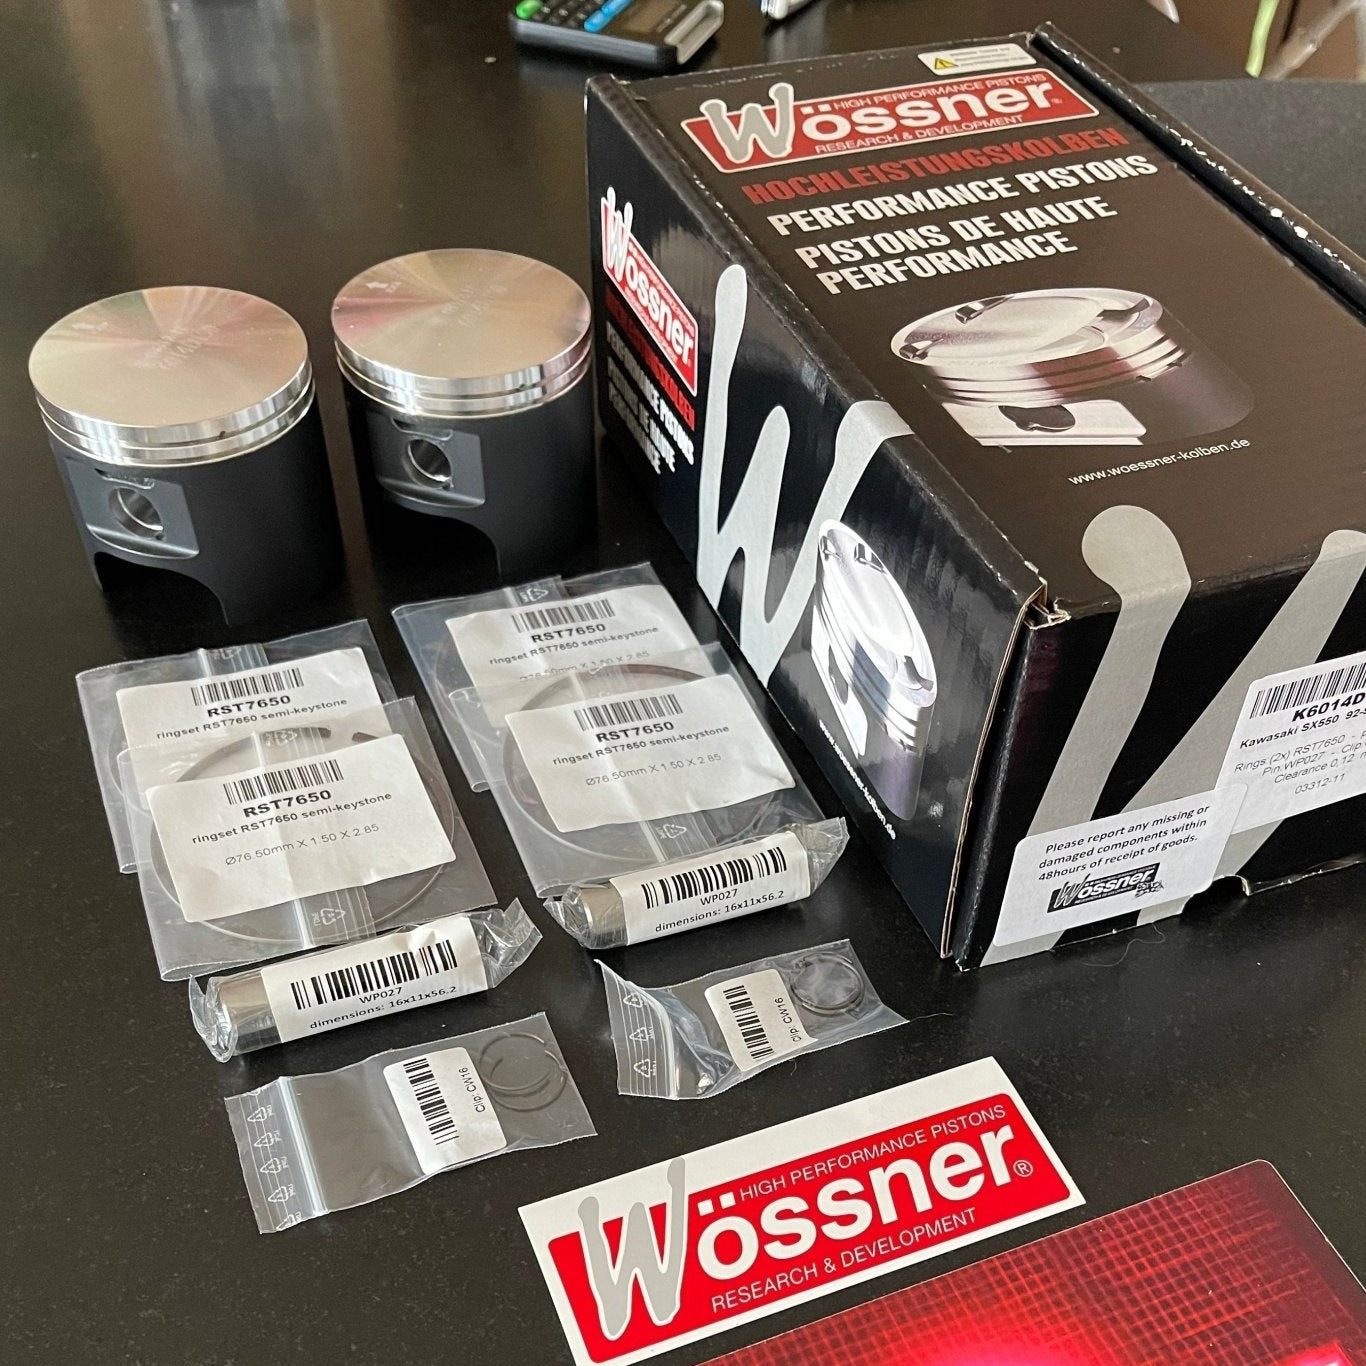 Wossner Forged Piston Kit for Kawasaki X2 650SX SC and TS - 1.5mm Over - Performance Jet Ski (PJS) UK